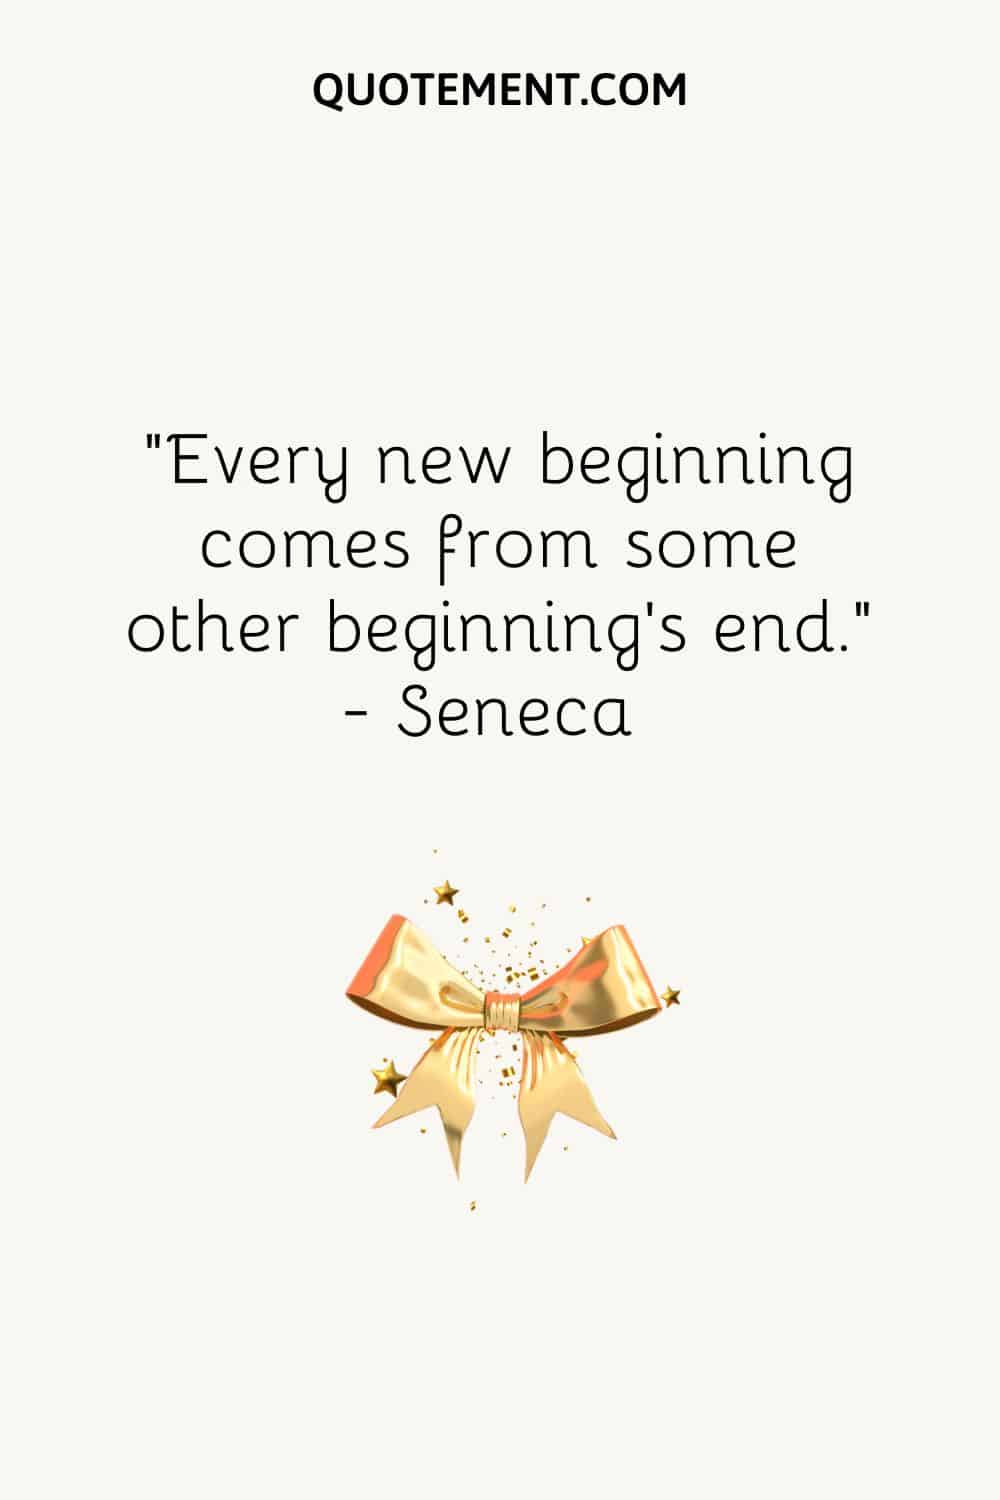 “Every new beginning comes from some other beginning’s end.” ― Seneca